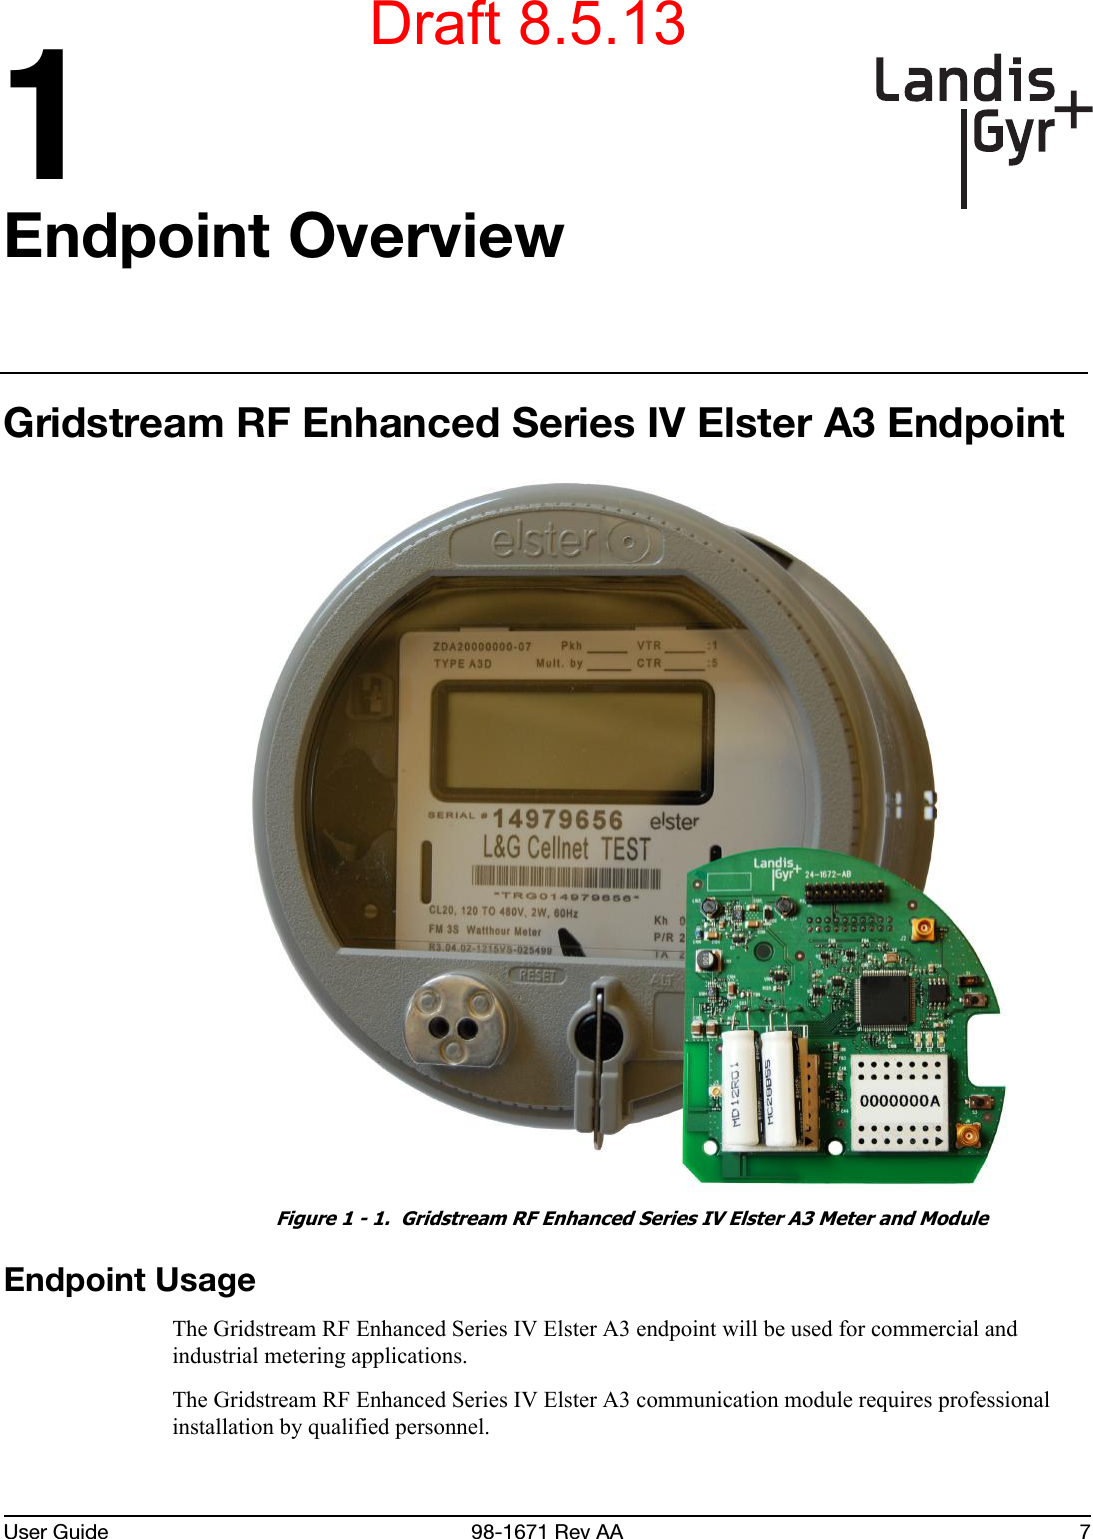 User Guide 98-1671 Rev AA 71Endpoint OverviewGridstream RF Enhanced Series IV Elster A3 EndpointFigure 1 - 1.  Gridstream RF Enhanced Series IV Elster A3 Meter and ModuleEndpoint UsageThe Gridstream RF Enhanced Series IV Elster A3 endpoint will be used for commercial and industrial metering applications.The Gridstream RF Enhanced Series IV Elster A3 communication module requires professional installation by qualified personnel.Draft 8.5.13